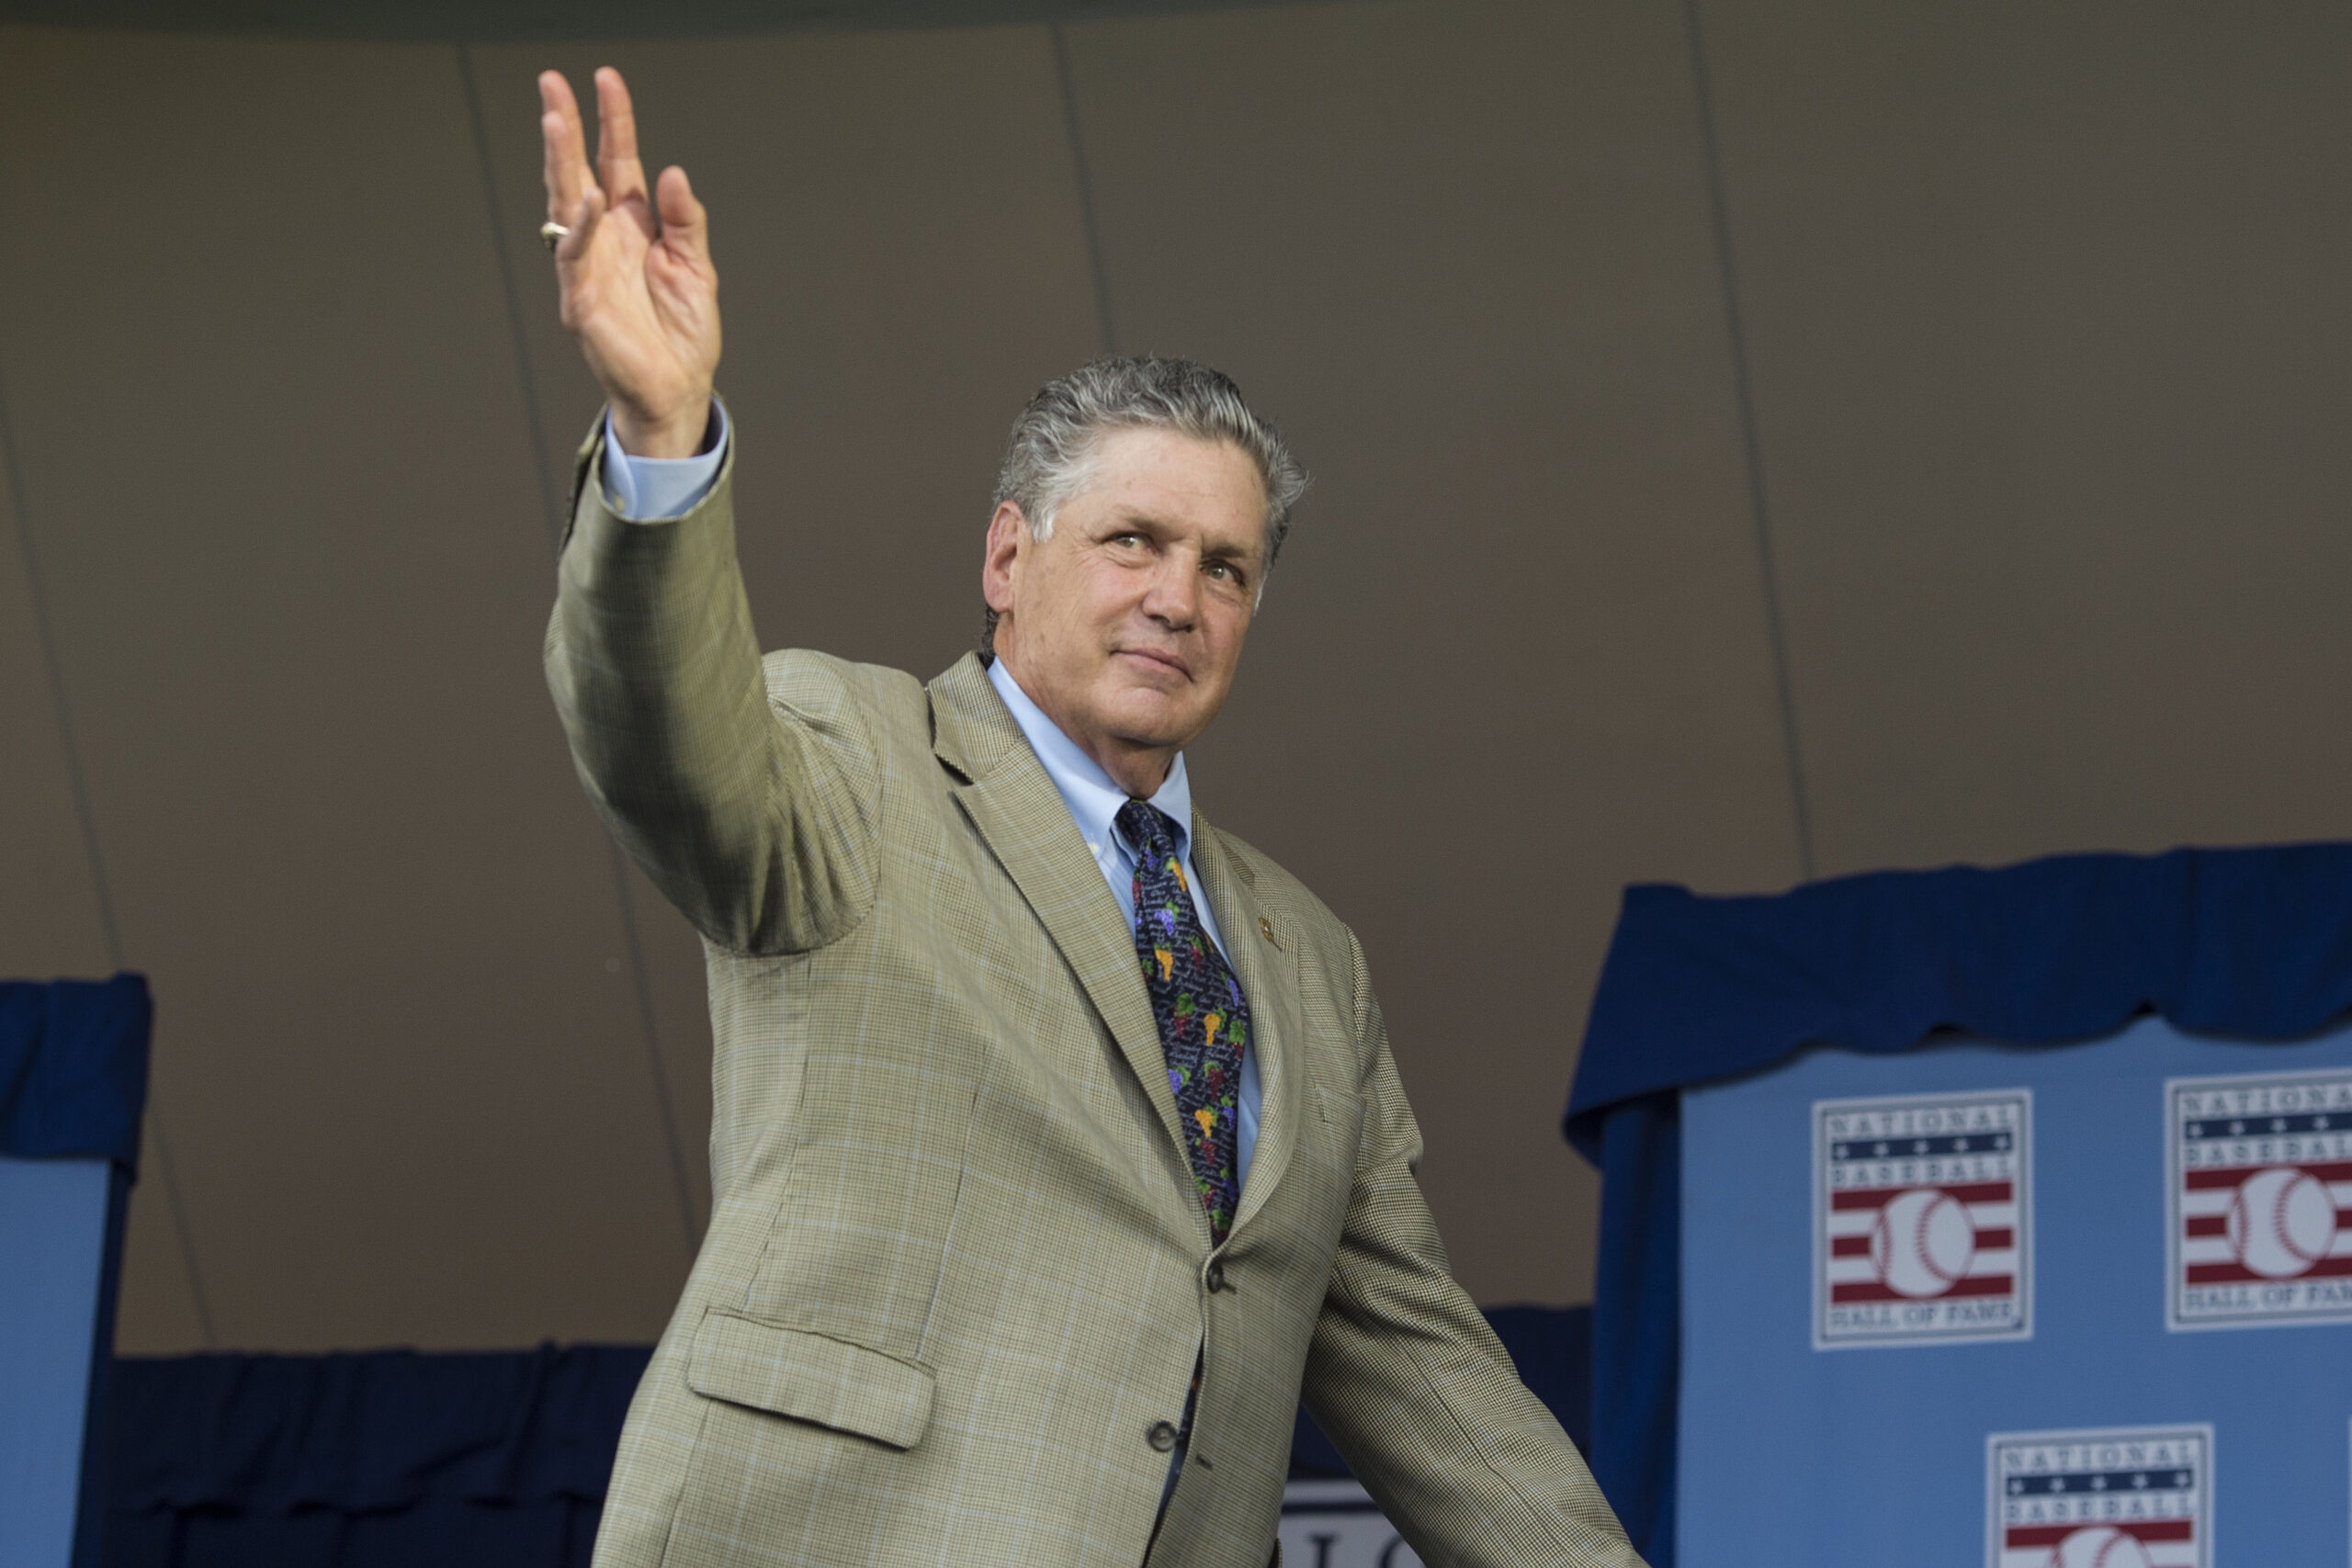 Tom Seaver: Memories of The Franchise and His Legacy One Year After His Untimely Passing